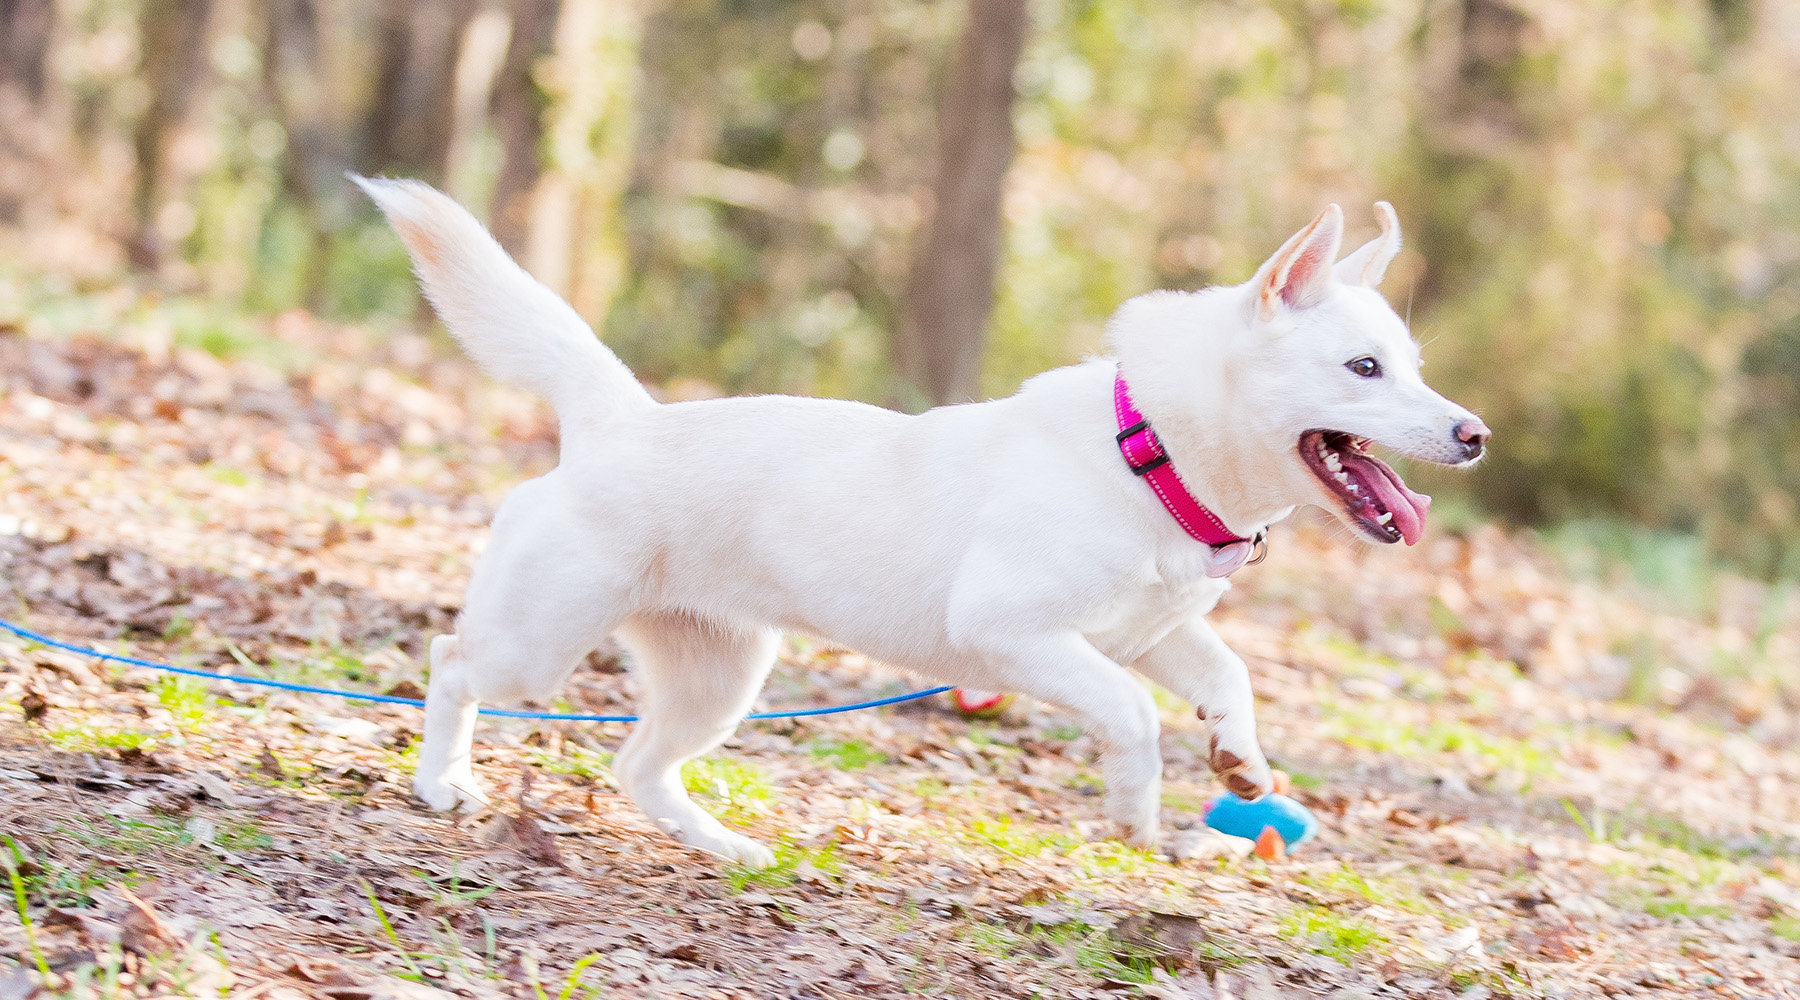 Belle runs through her backyard with a toy